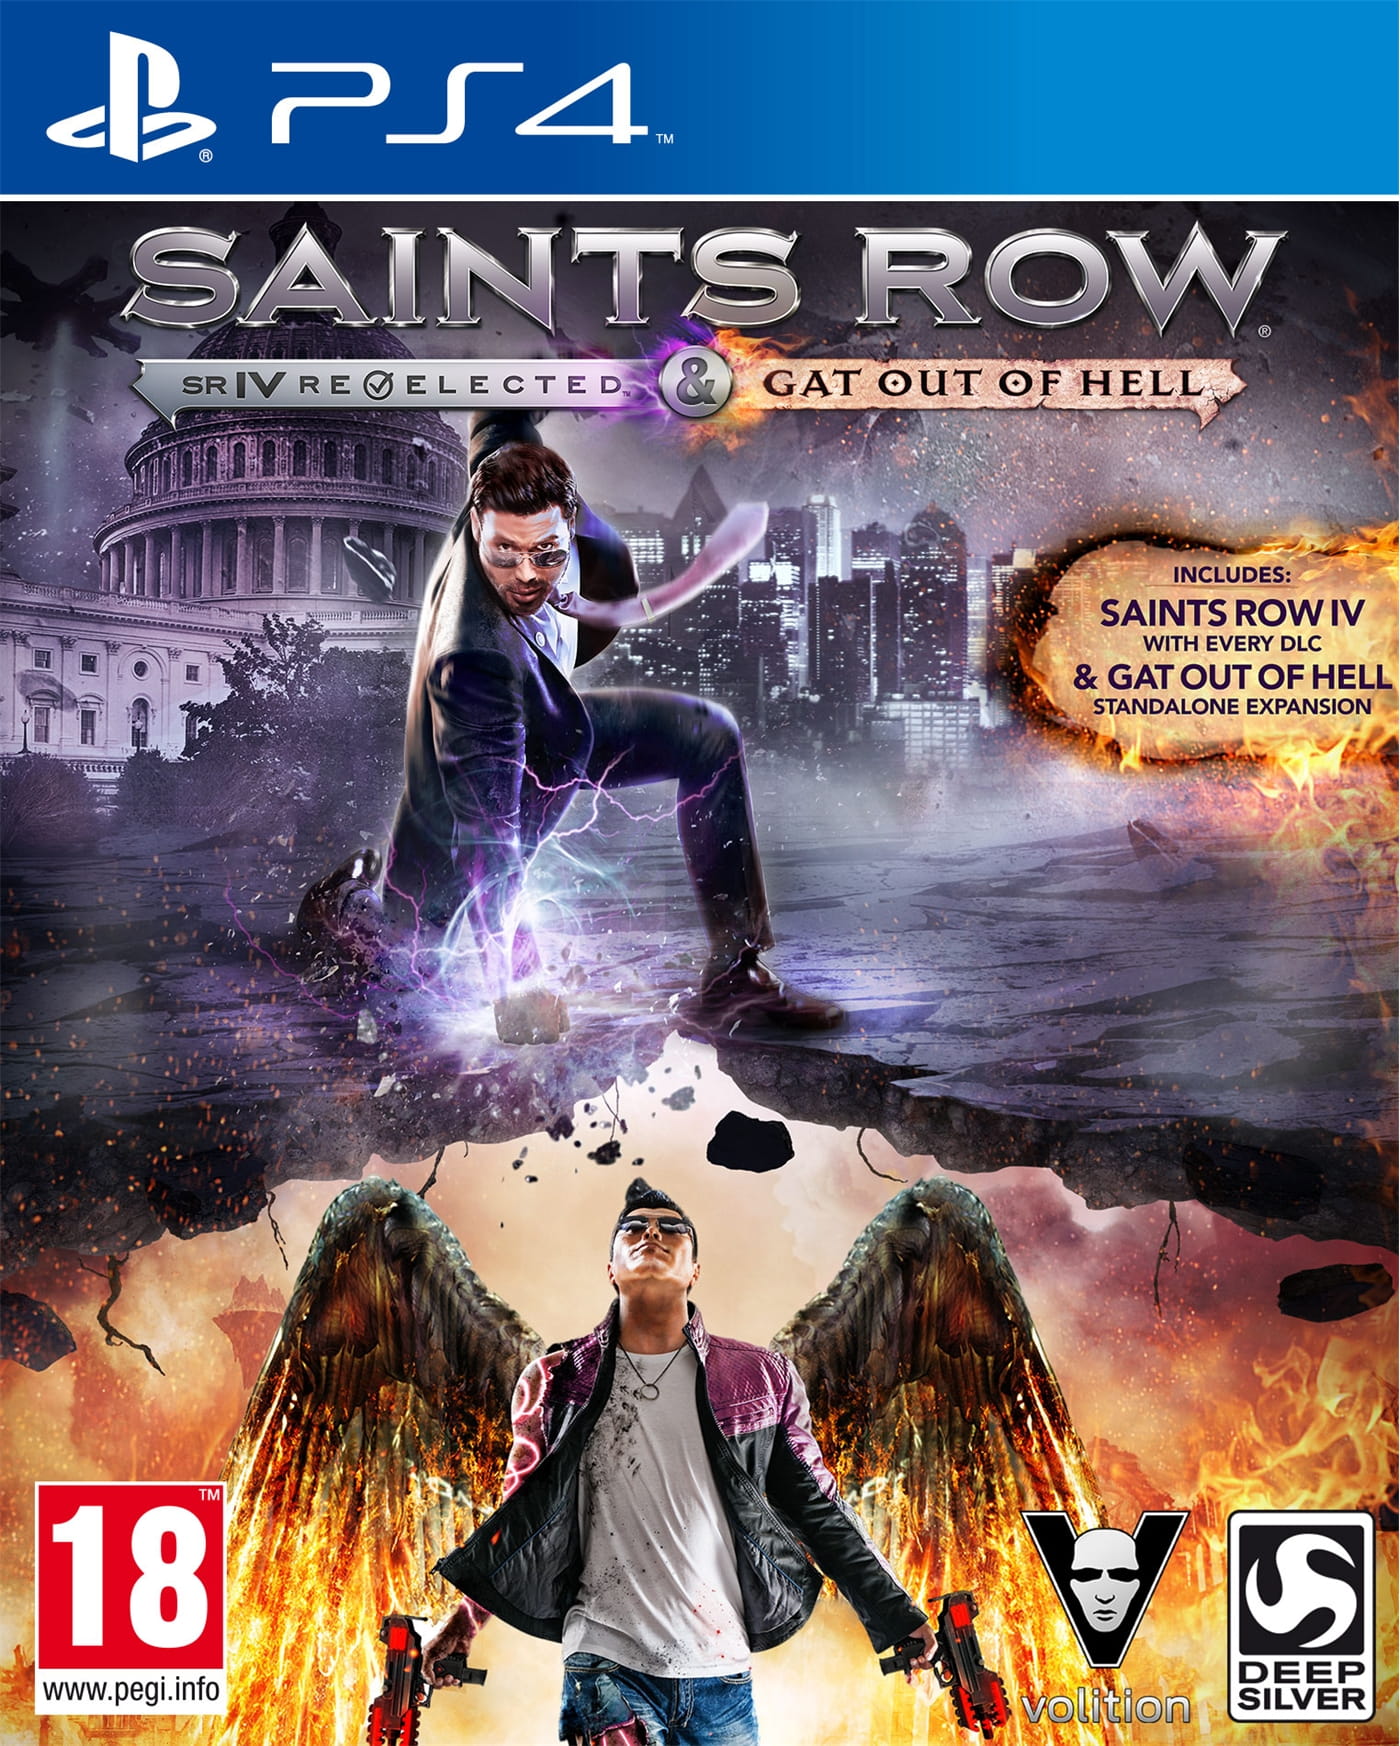 Saints Row IV Relected / Gat out of Hell - D1548